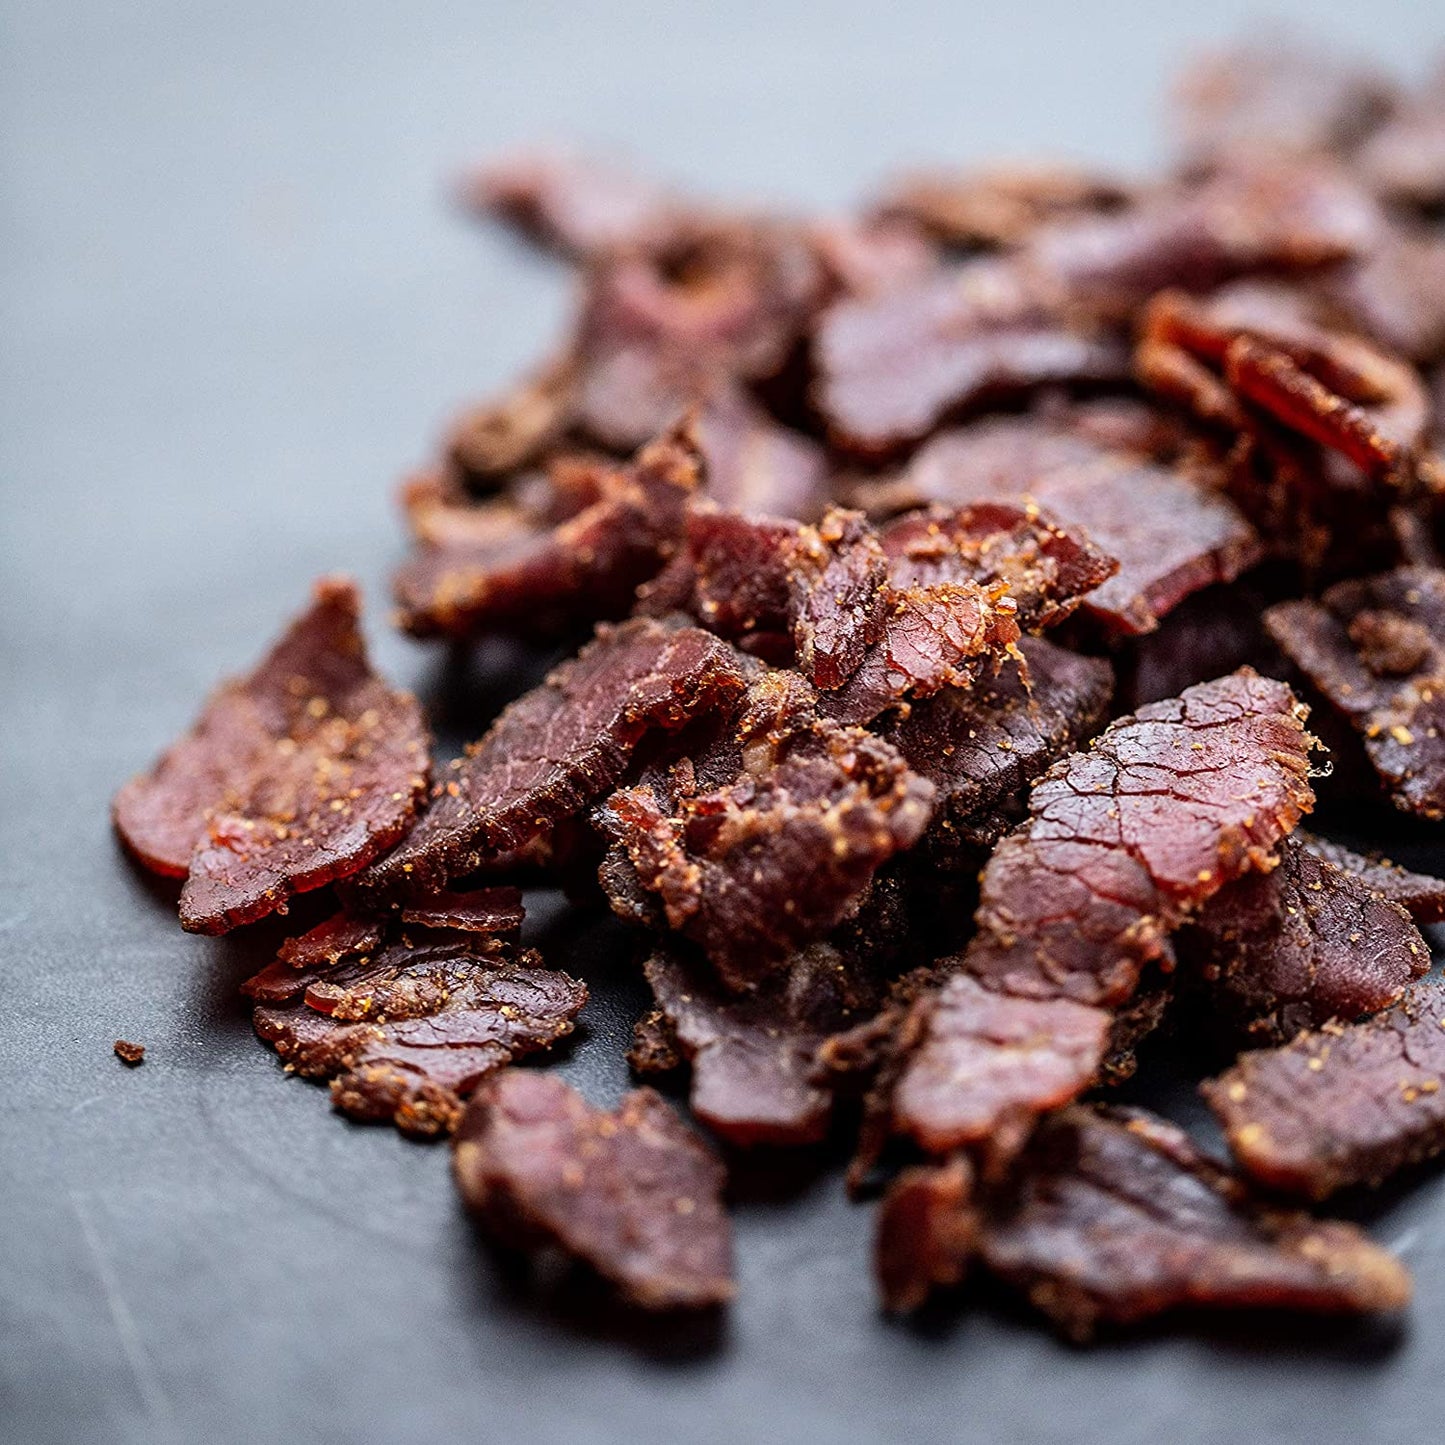 Biltong Beef Jerky | Keto, Paleo, Gluten Free, High Protein | Hormone Free All Natural South African Style Biltong, No Artificial Flavors or Preservatives, Low Carb Antibiotics (Variety Pack)